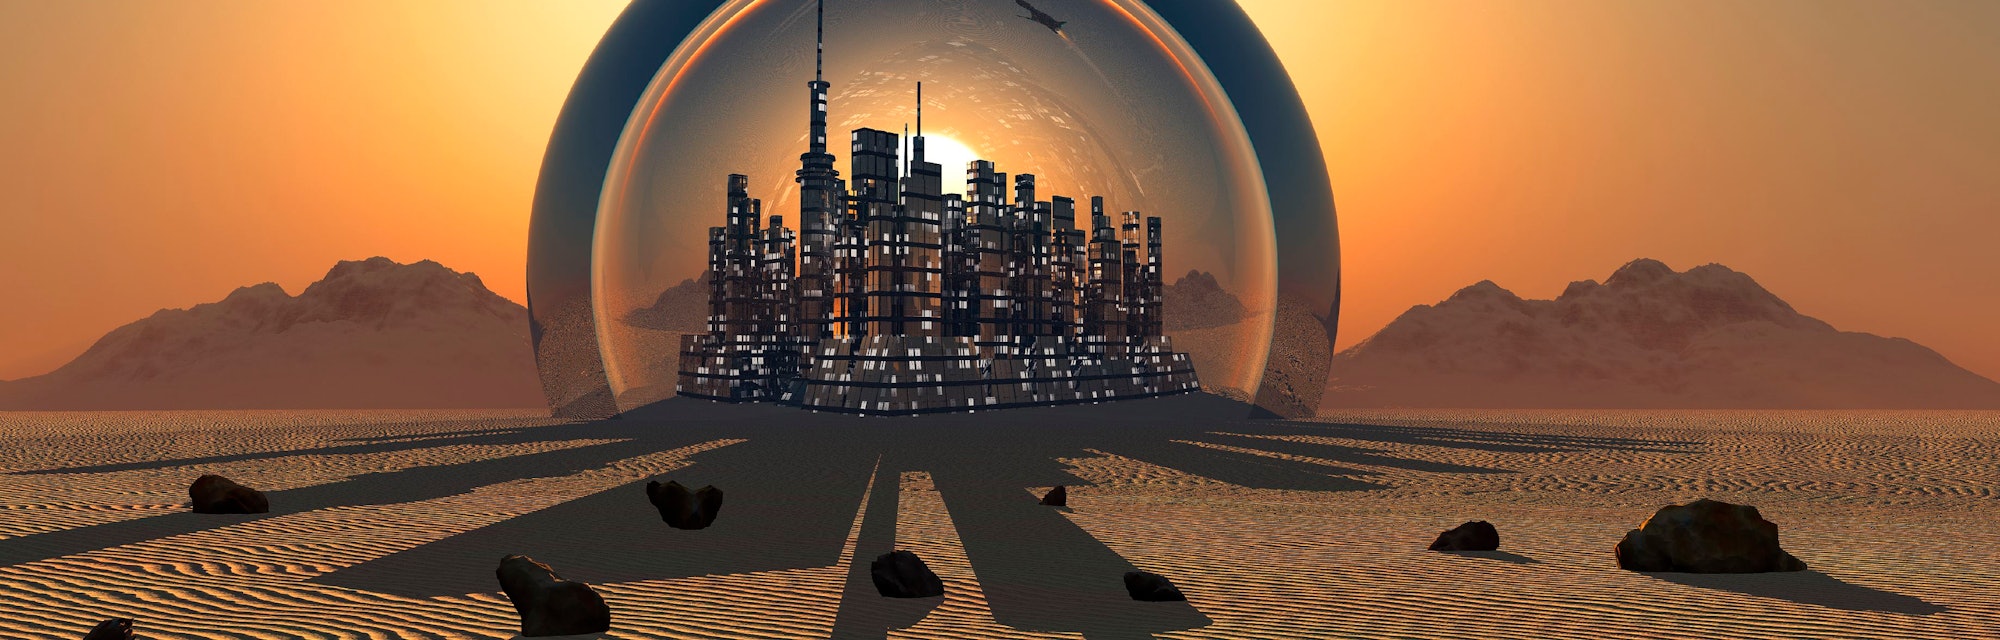 Futuristic City in Protective Sphere on the Surface of the Planet Mars